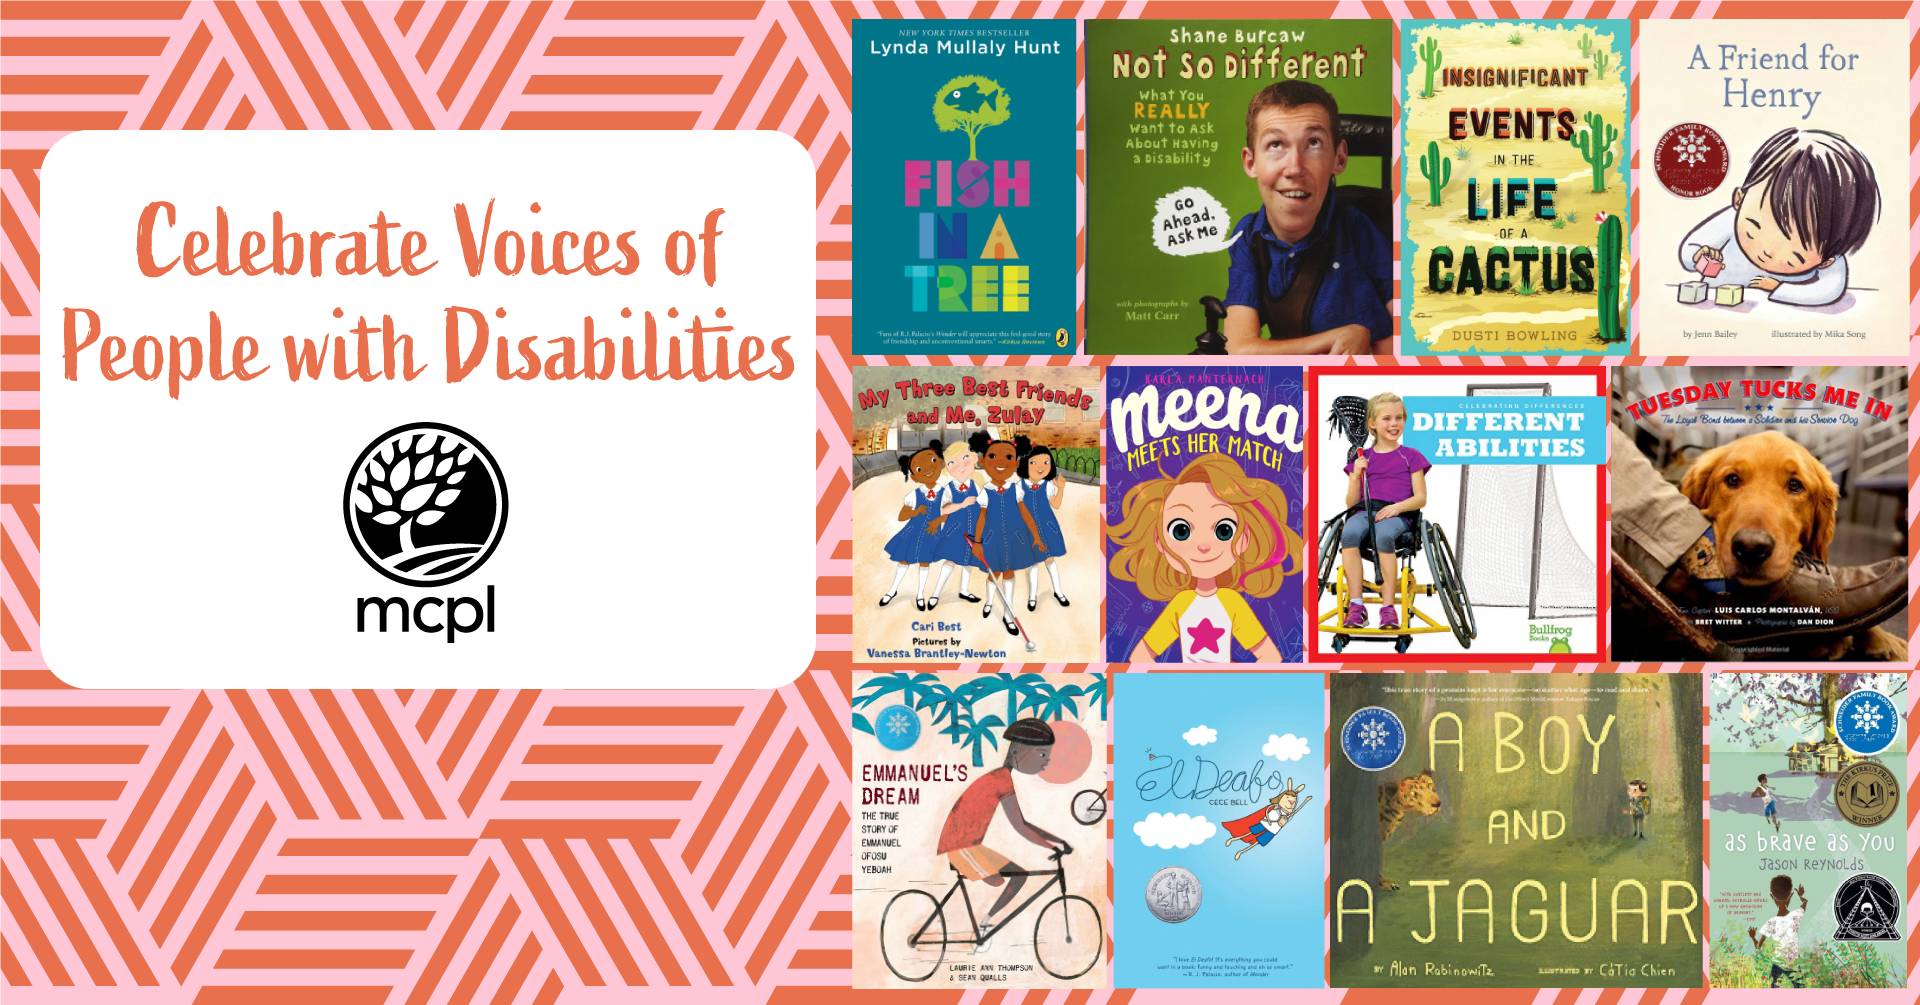 Celebrate Voices of People with Disabilities